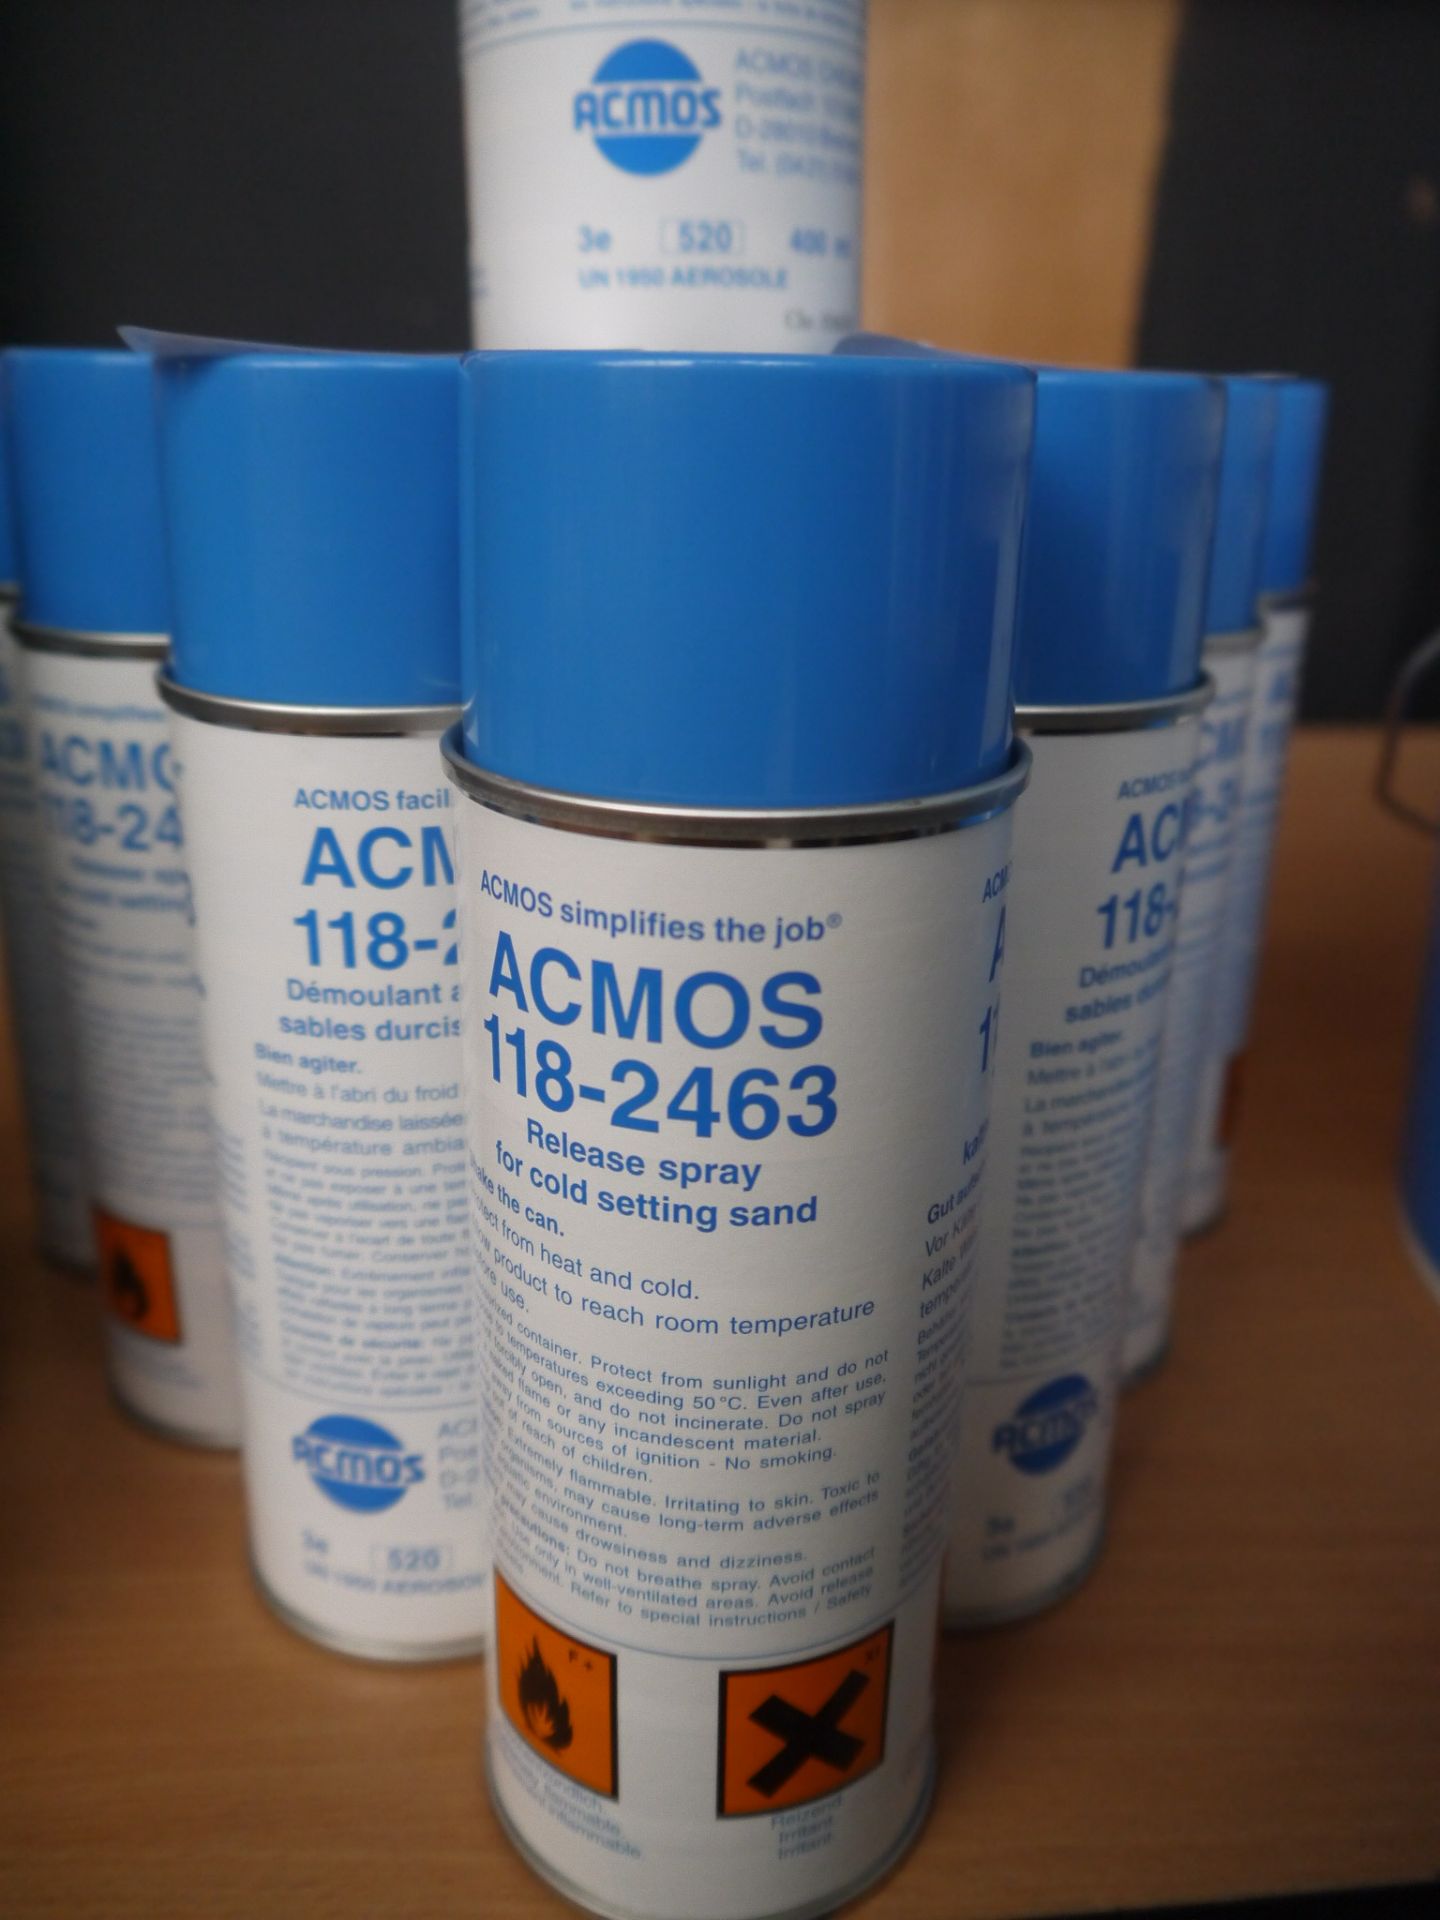 3x 400 ml of ACMOS cold setting sand spray,